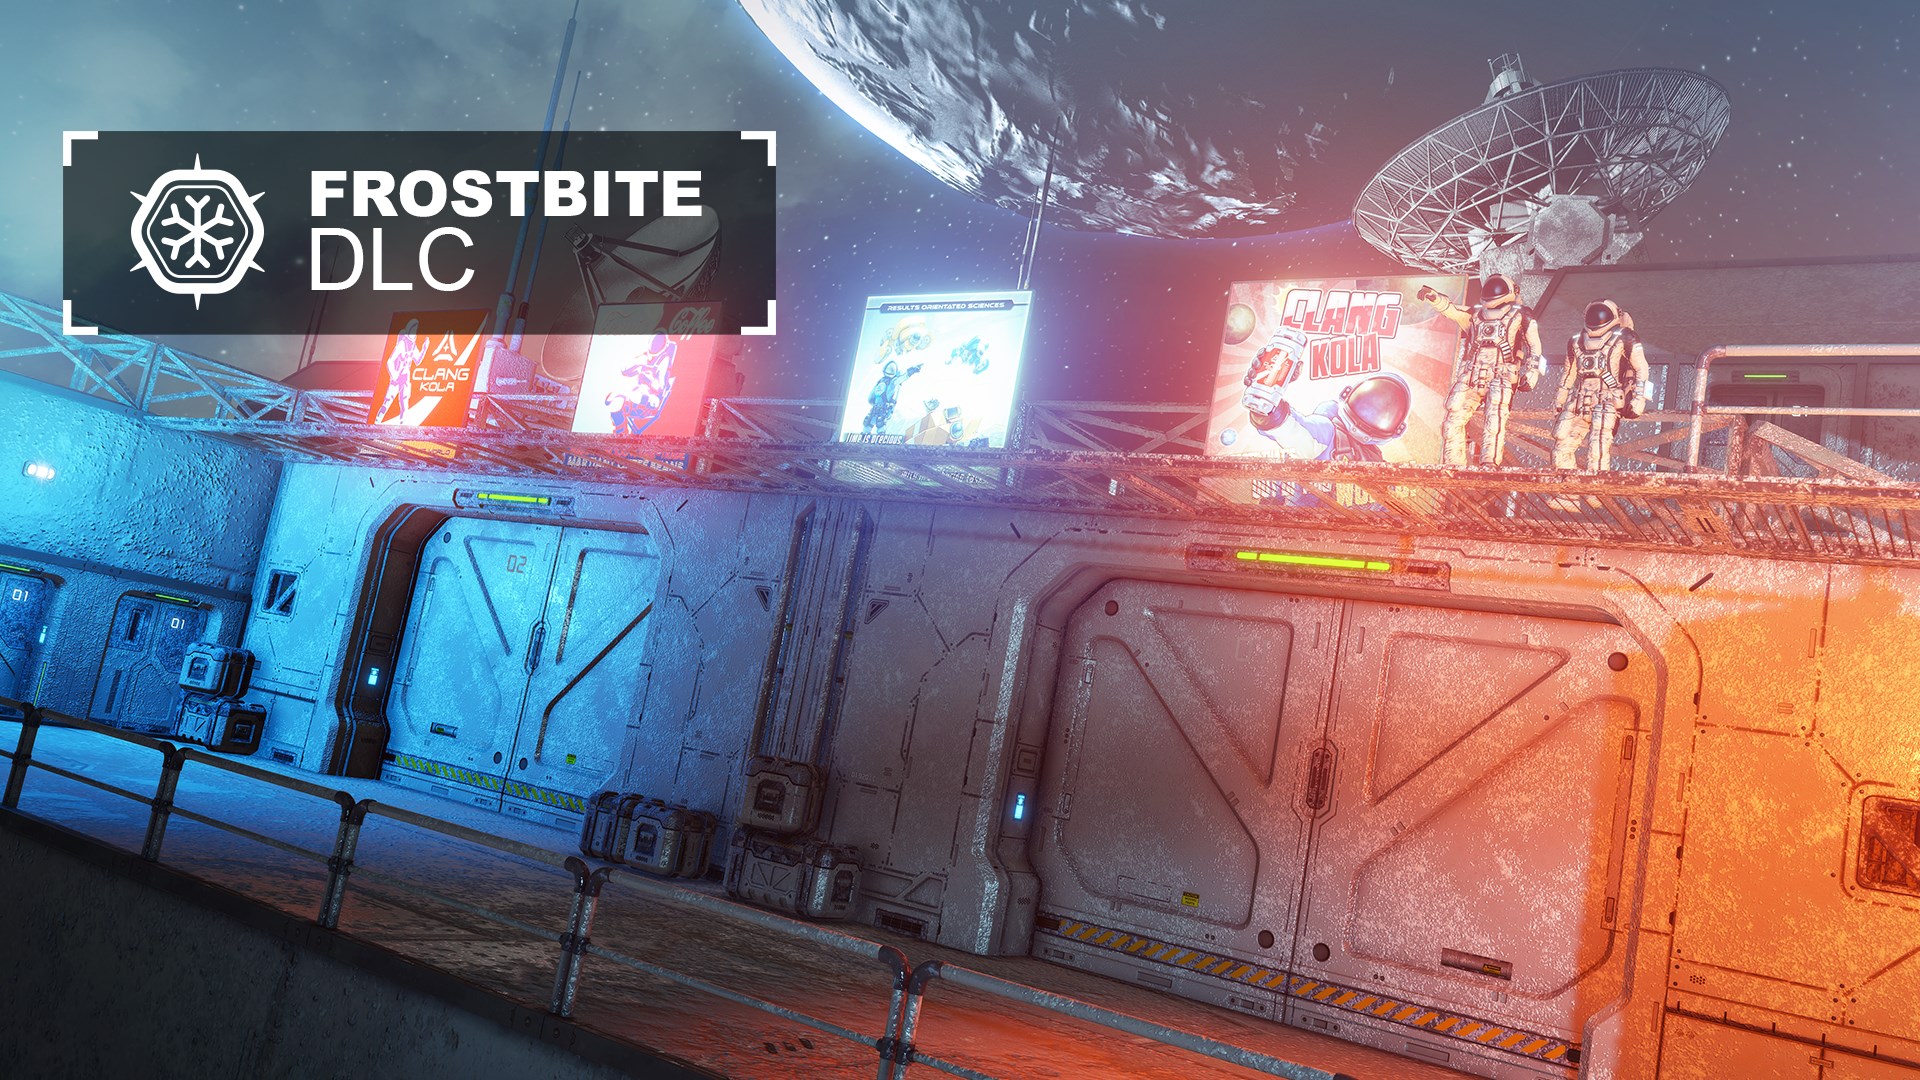 space engineers xbox one store